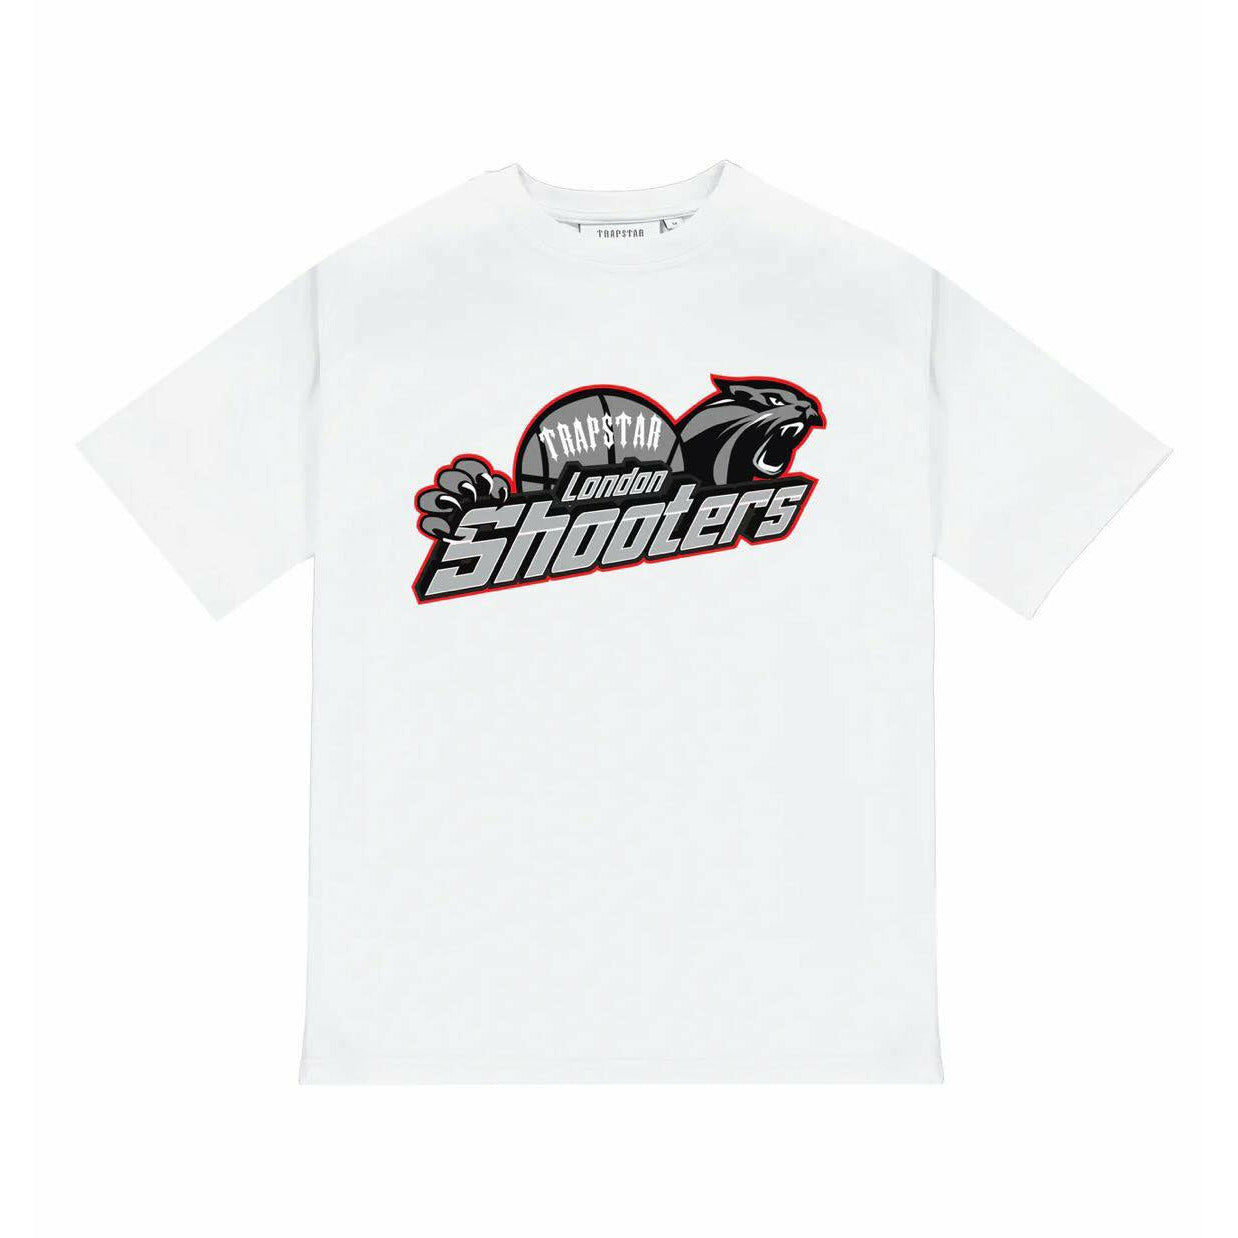 Trapstar Shooters Tee - Grey/Red – FLUENT STORE